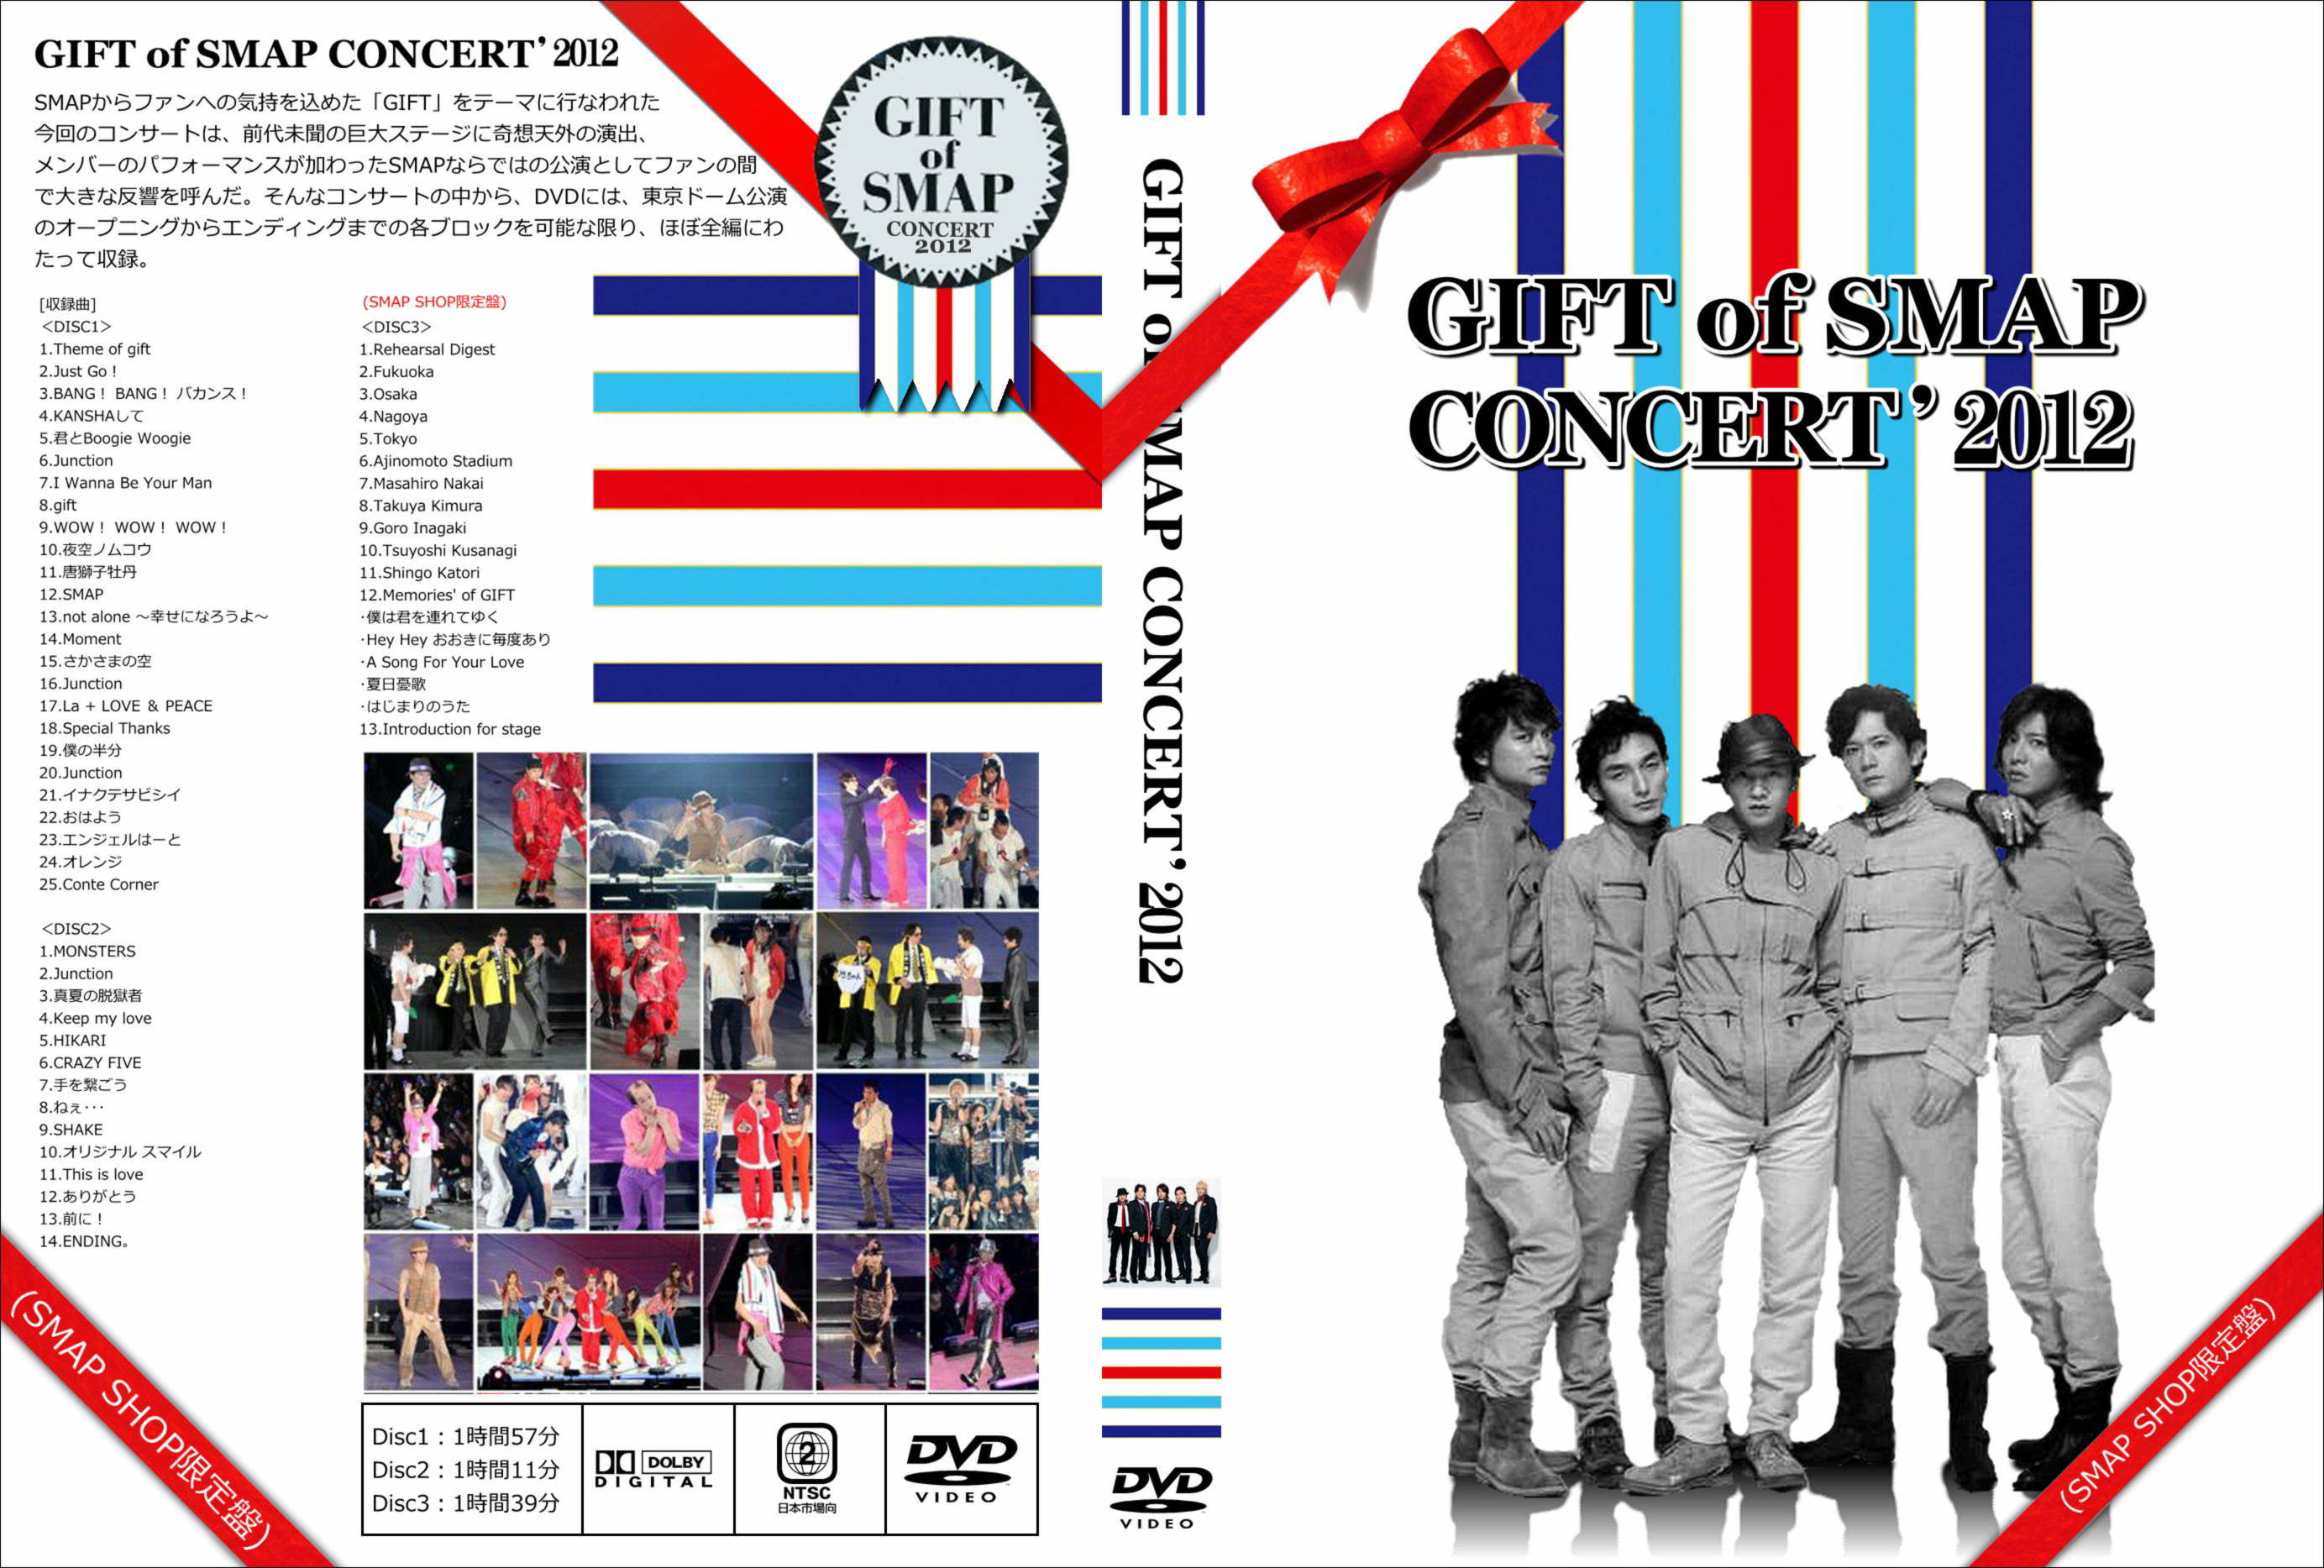 GIFT of SMAP CONCERT 2012 DVD